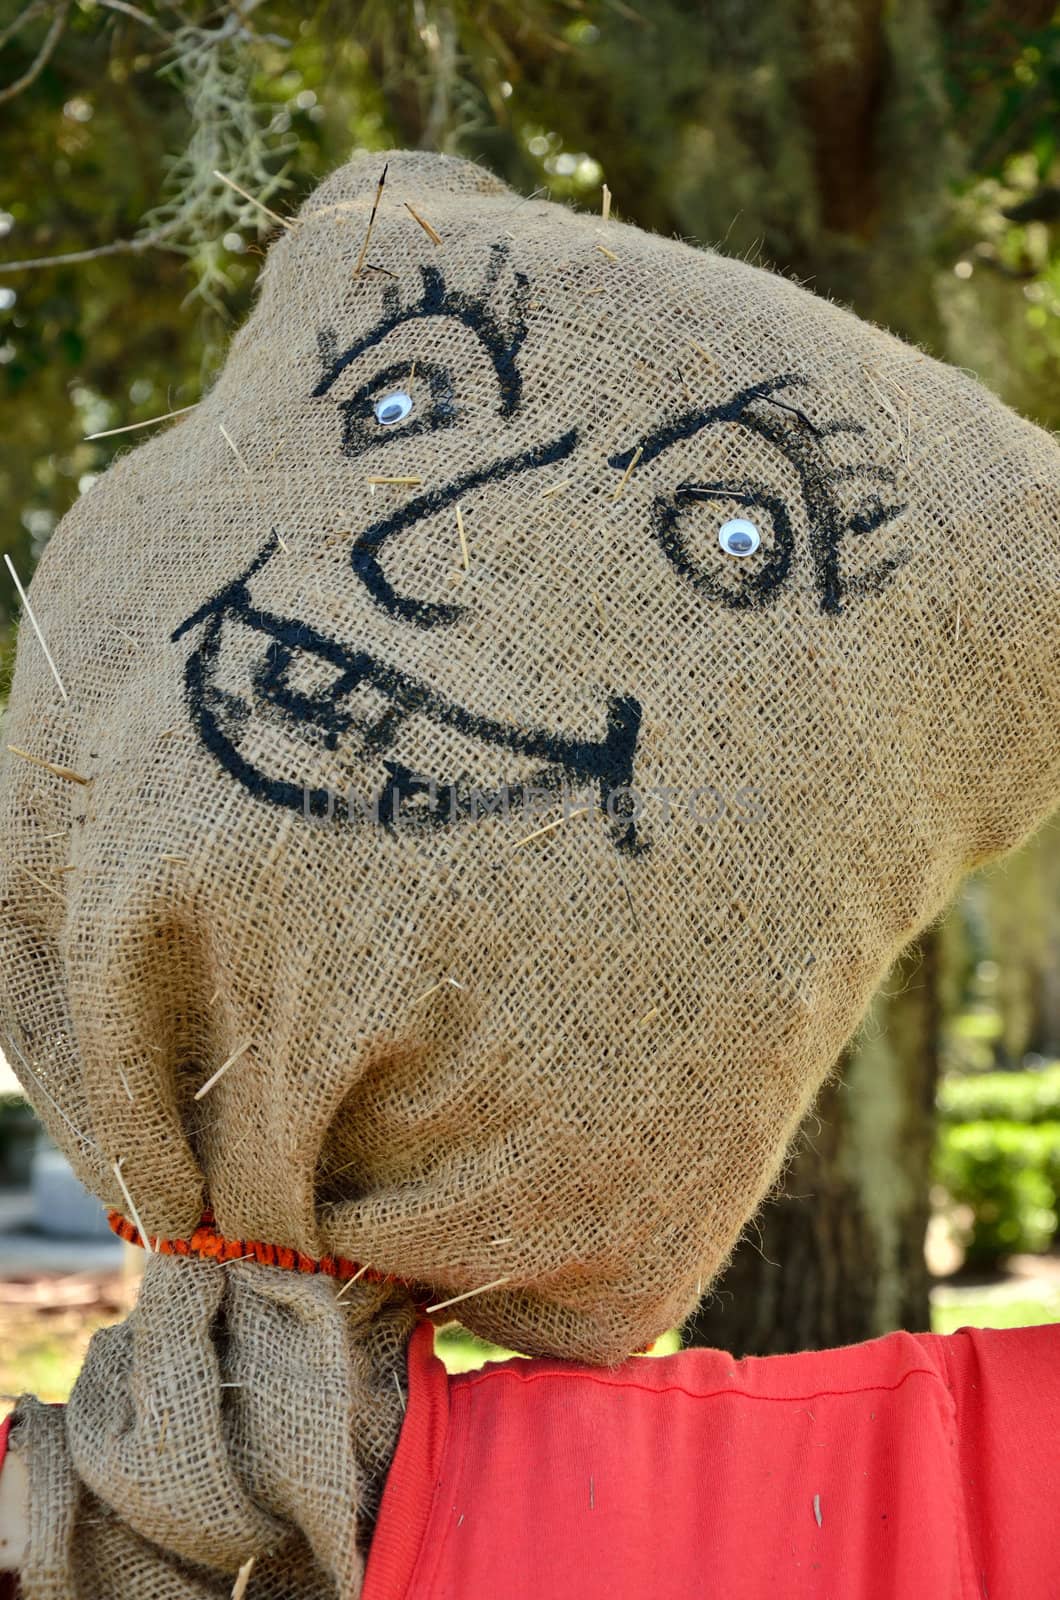 A handdrawn face on a stuffed burlap bag makes the head of a fall scarecrow